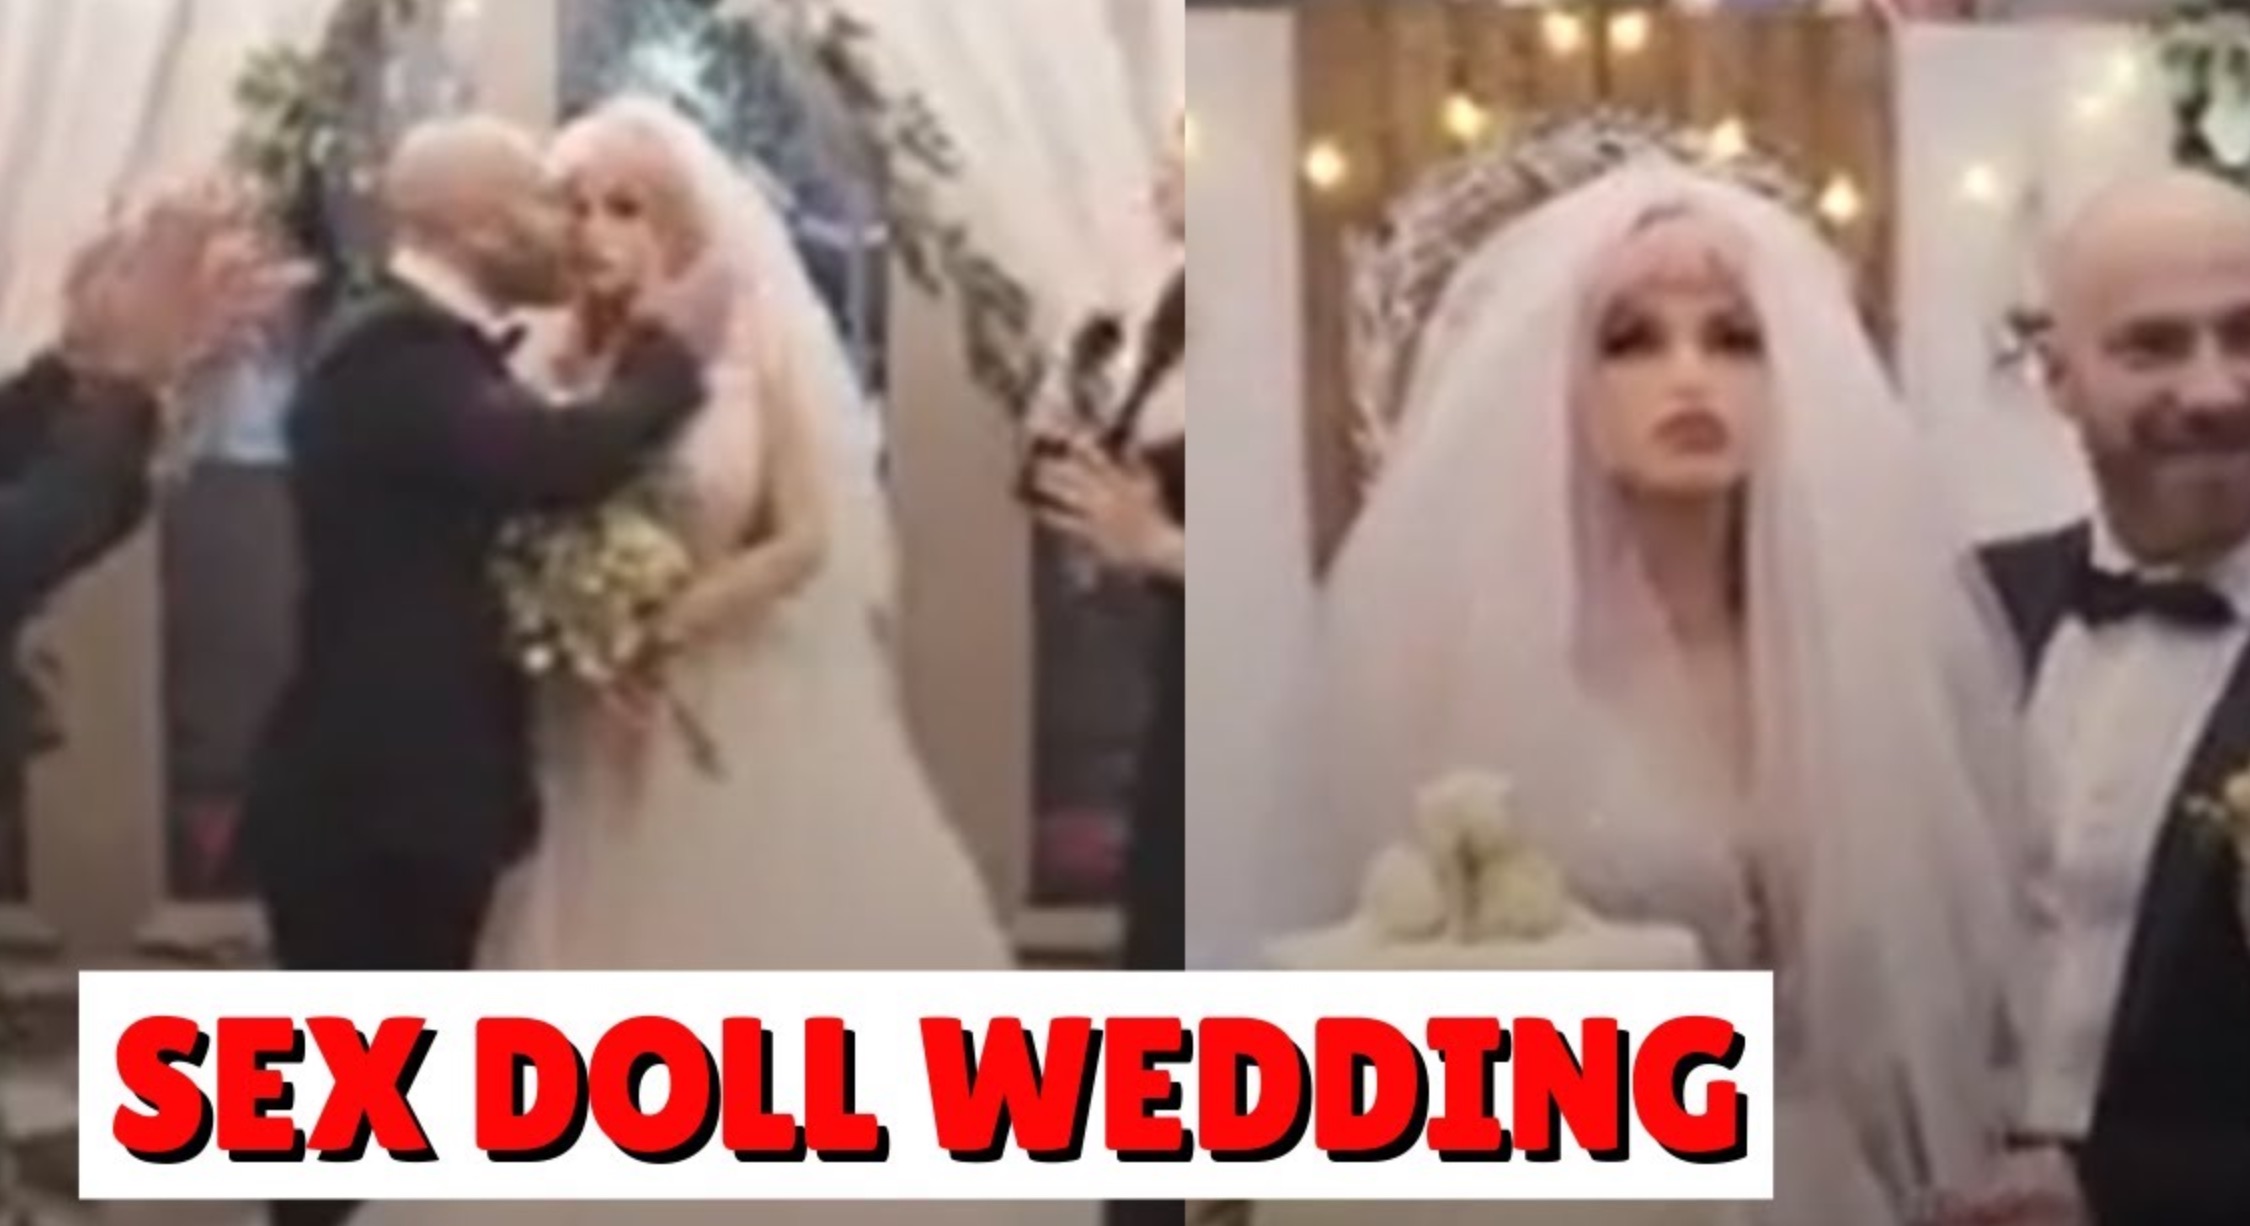 WTF Man Marries a Sex-Doll after months of relationship - Video